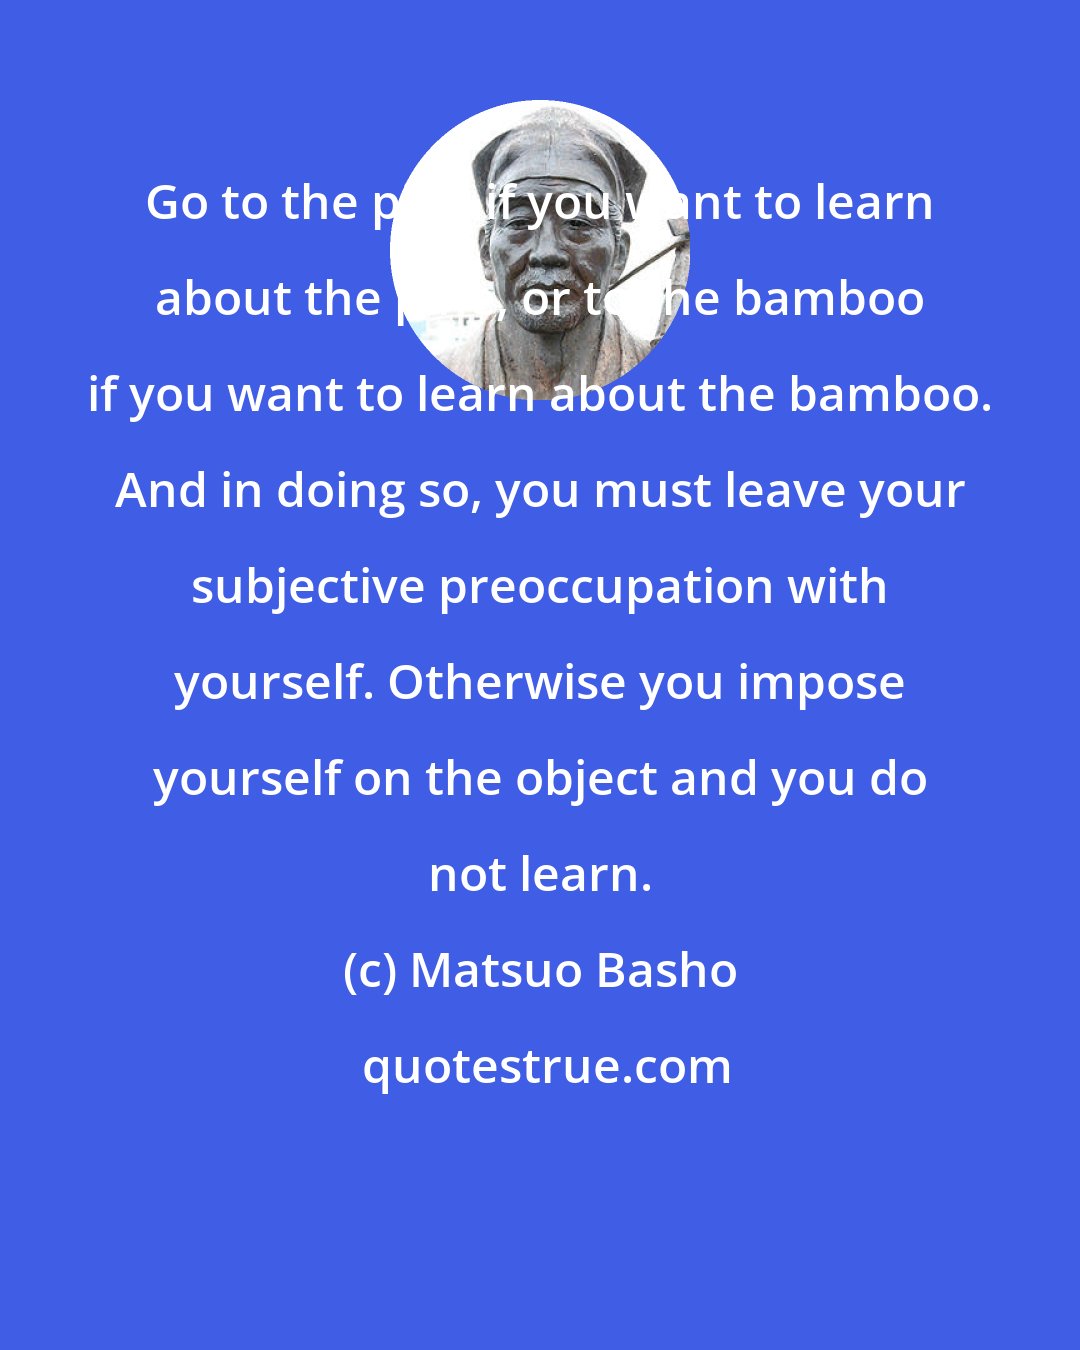 Matsuo Basho: Go to the pine if you want to learn about the pine, or to the bamboo if you want to learn about the bamboo. And in doing so, you must leave your subjective preoccupation with yourself. Otherwise you impose yourself on the object and you do not learn.